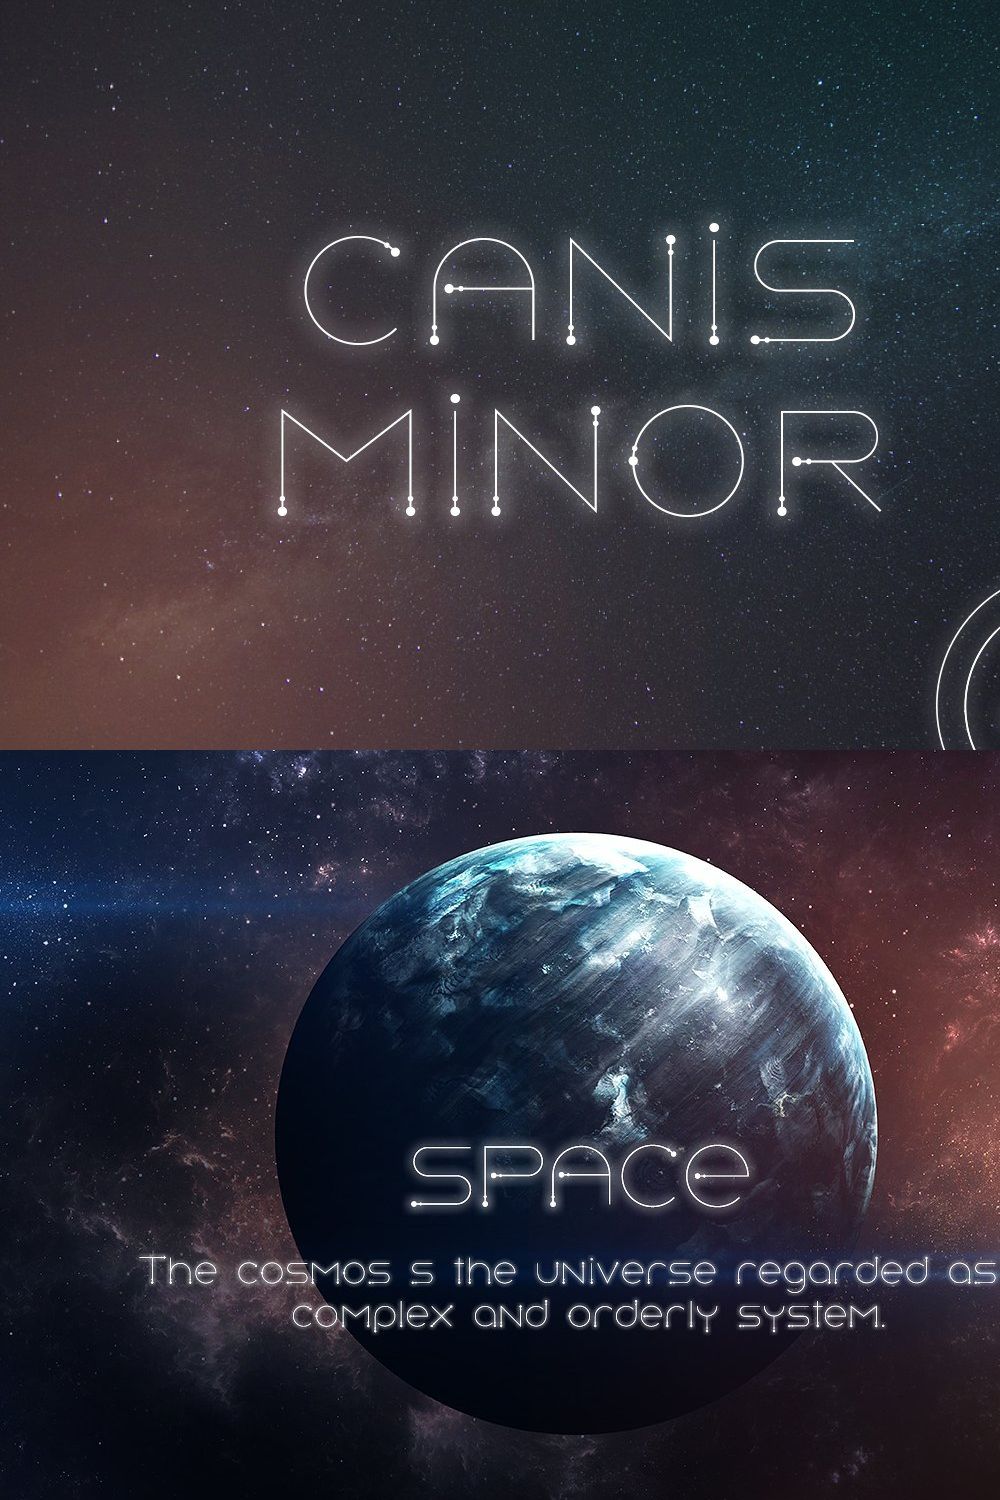 Canis Minor pinterest preview image.